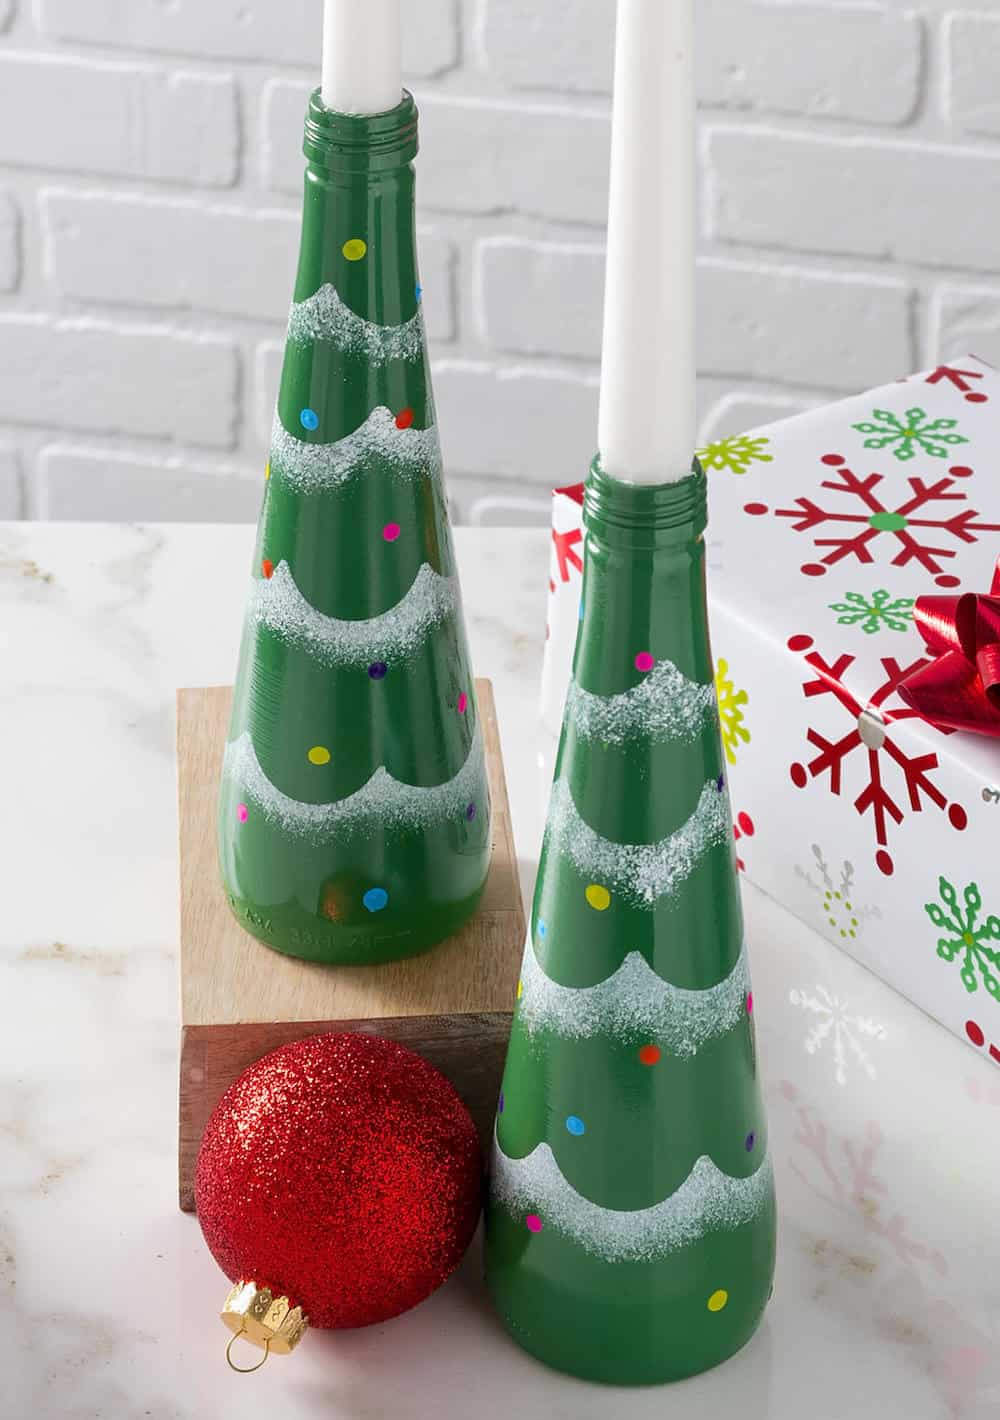 DIY Christmas candle holders from recycled soda bottles